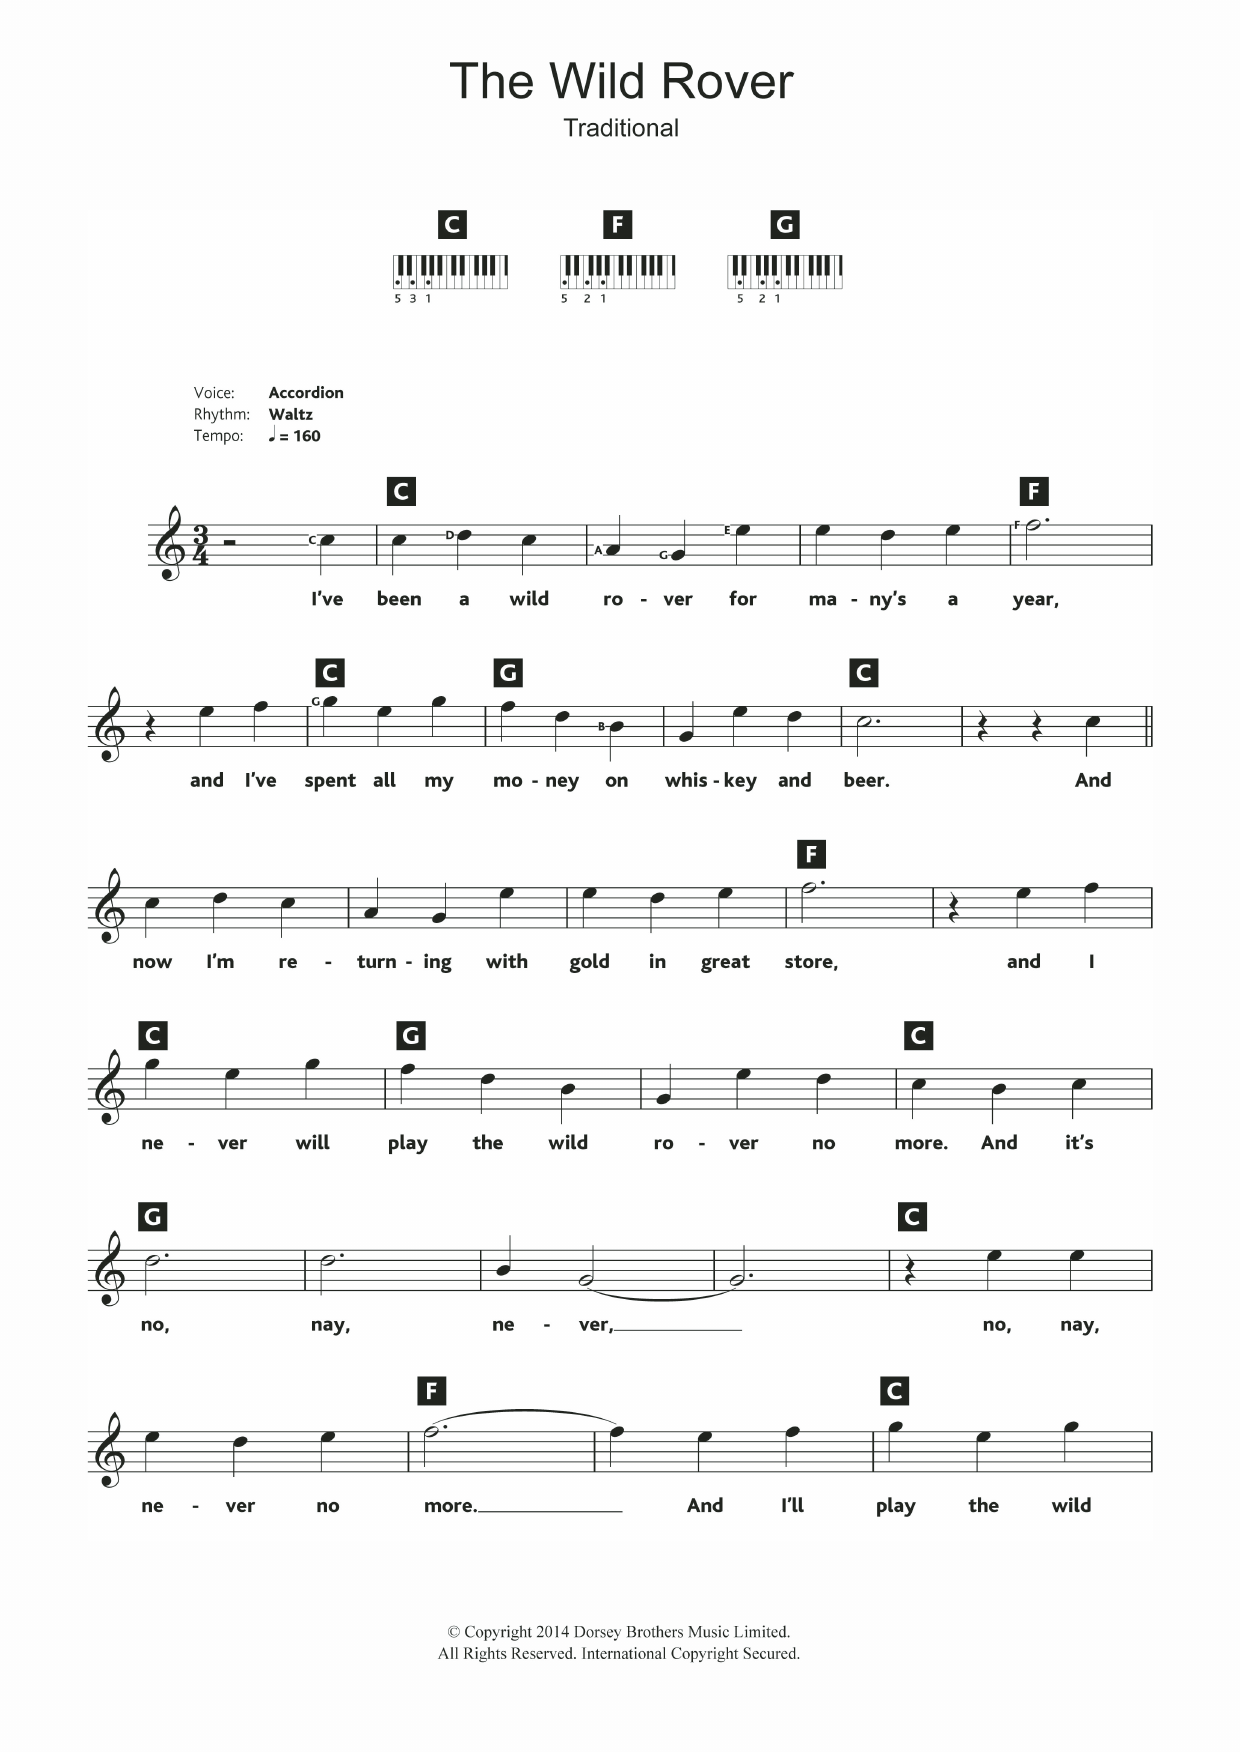 Download Traditional The Wild Rover Sheet Music